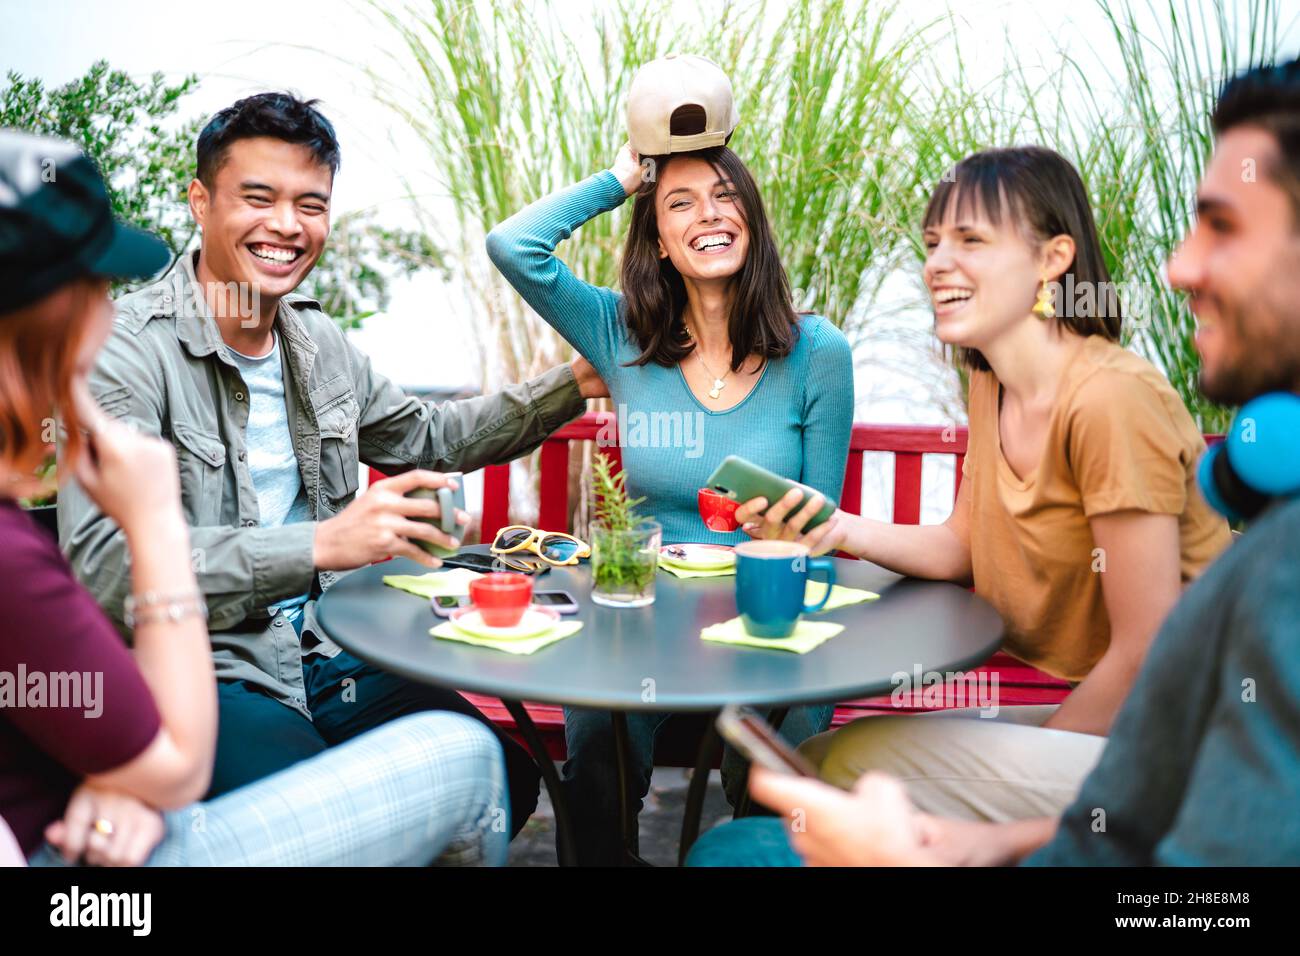 Multicultural group drinking latte at coffee bar restaurant - Happy friend talking and having fun together at hostel dehors - Life style concept Stock Photo